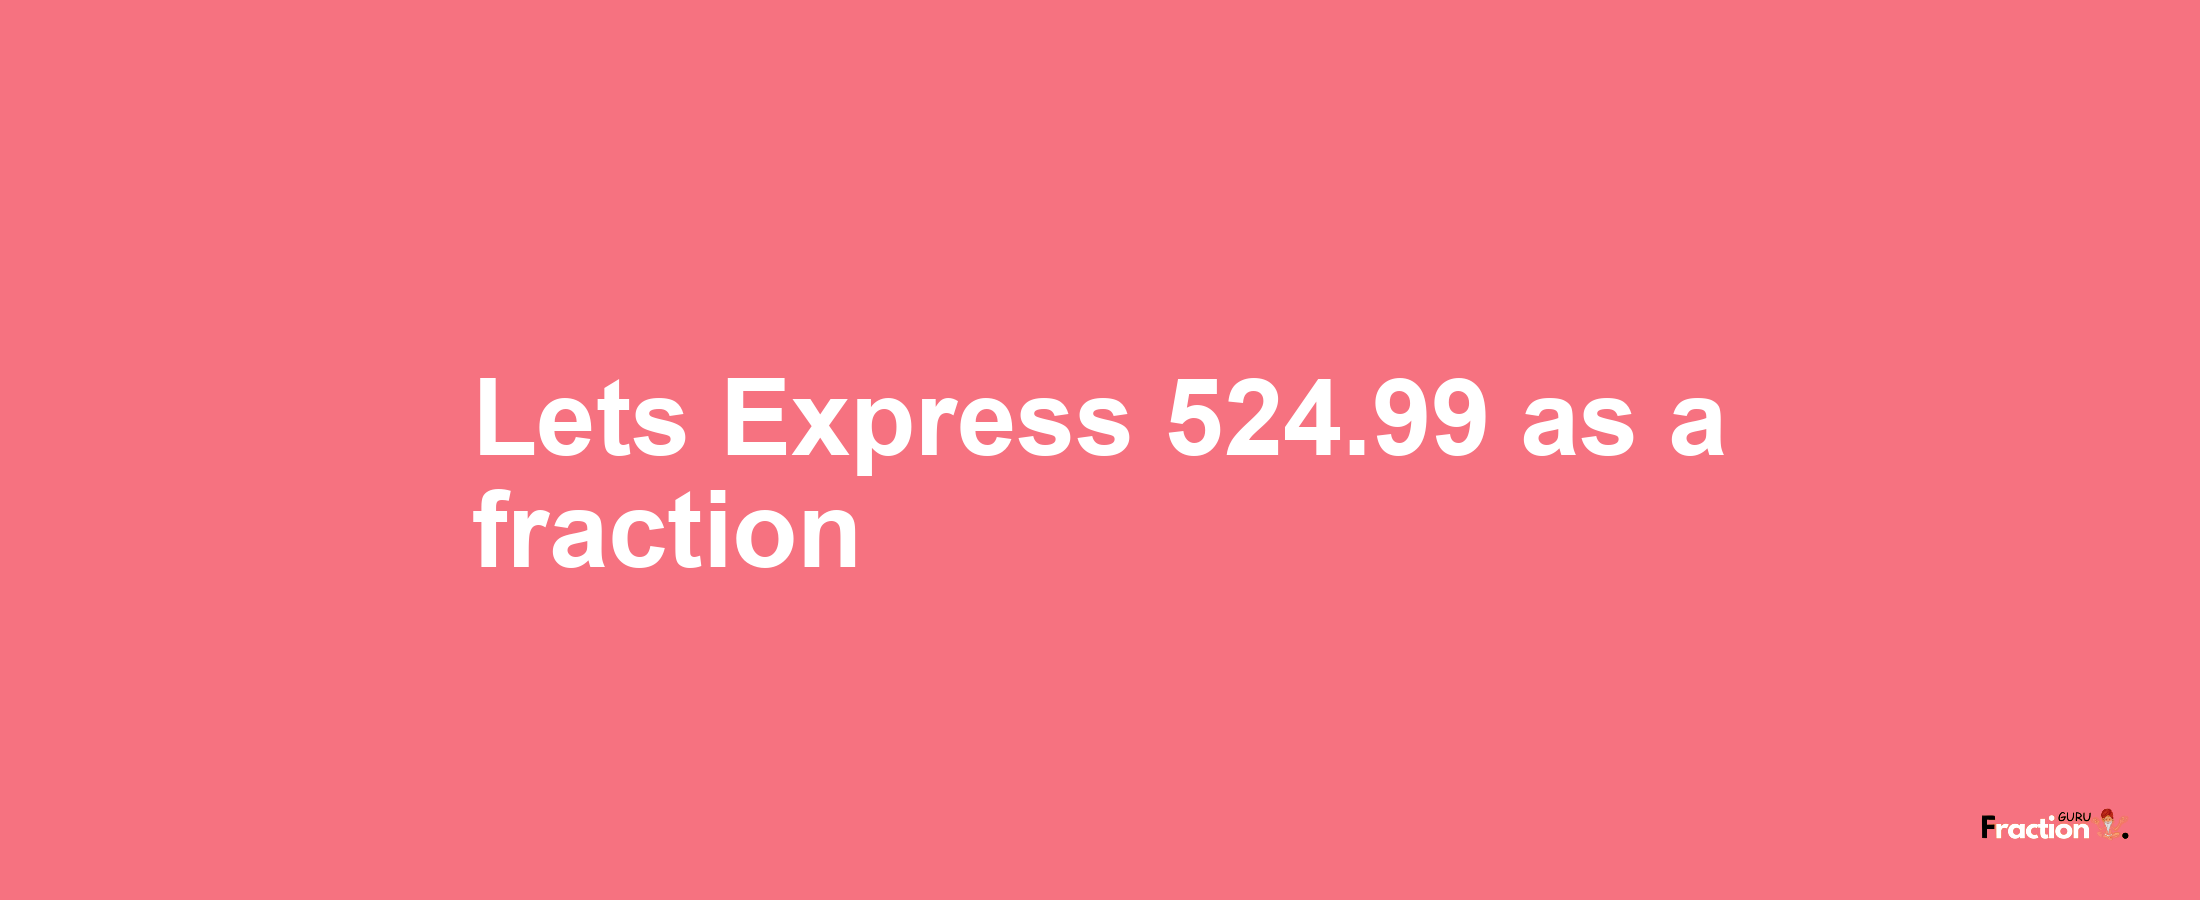 Lets Express 524.99 as afraction